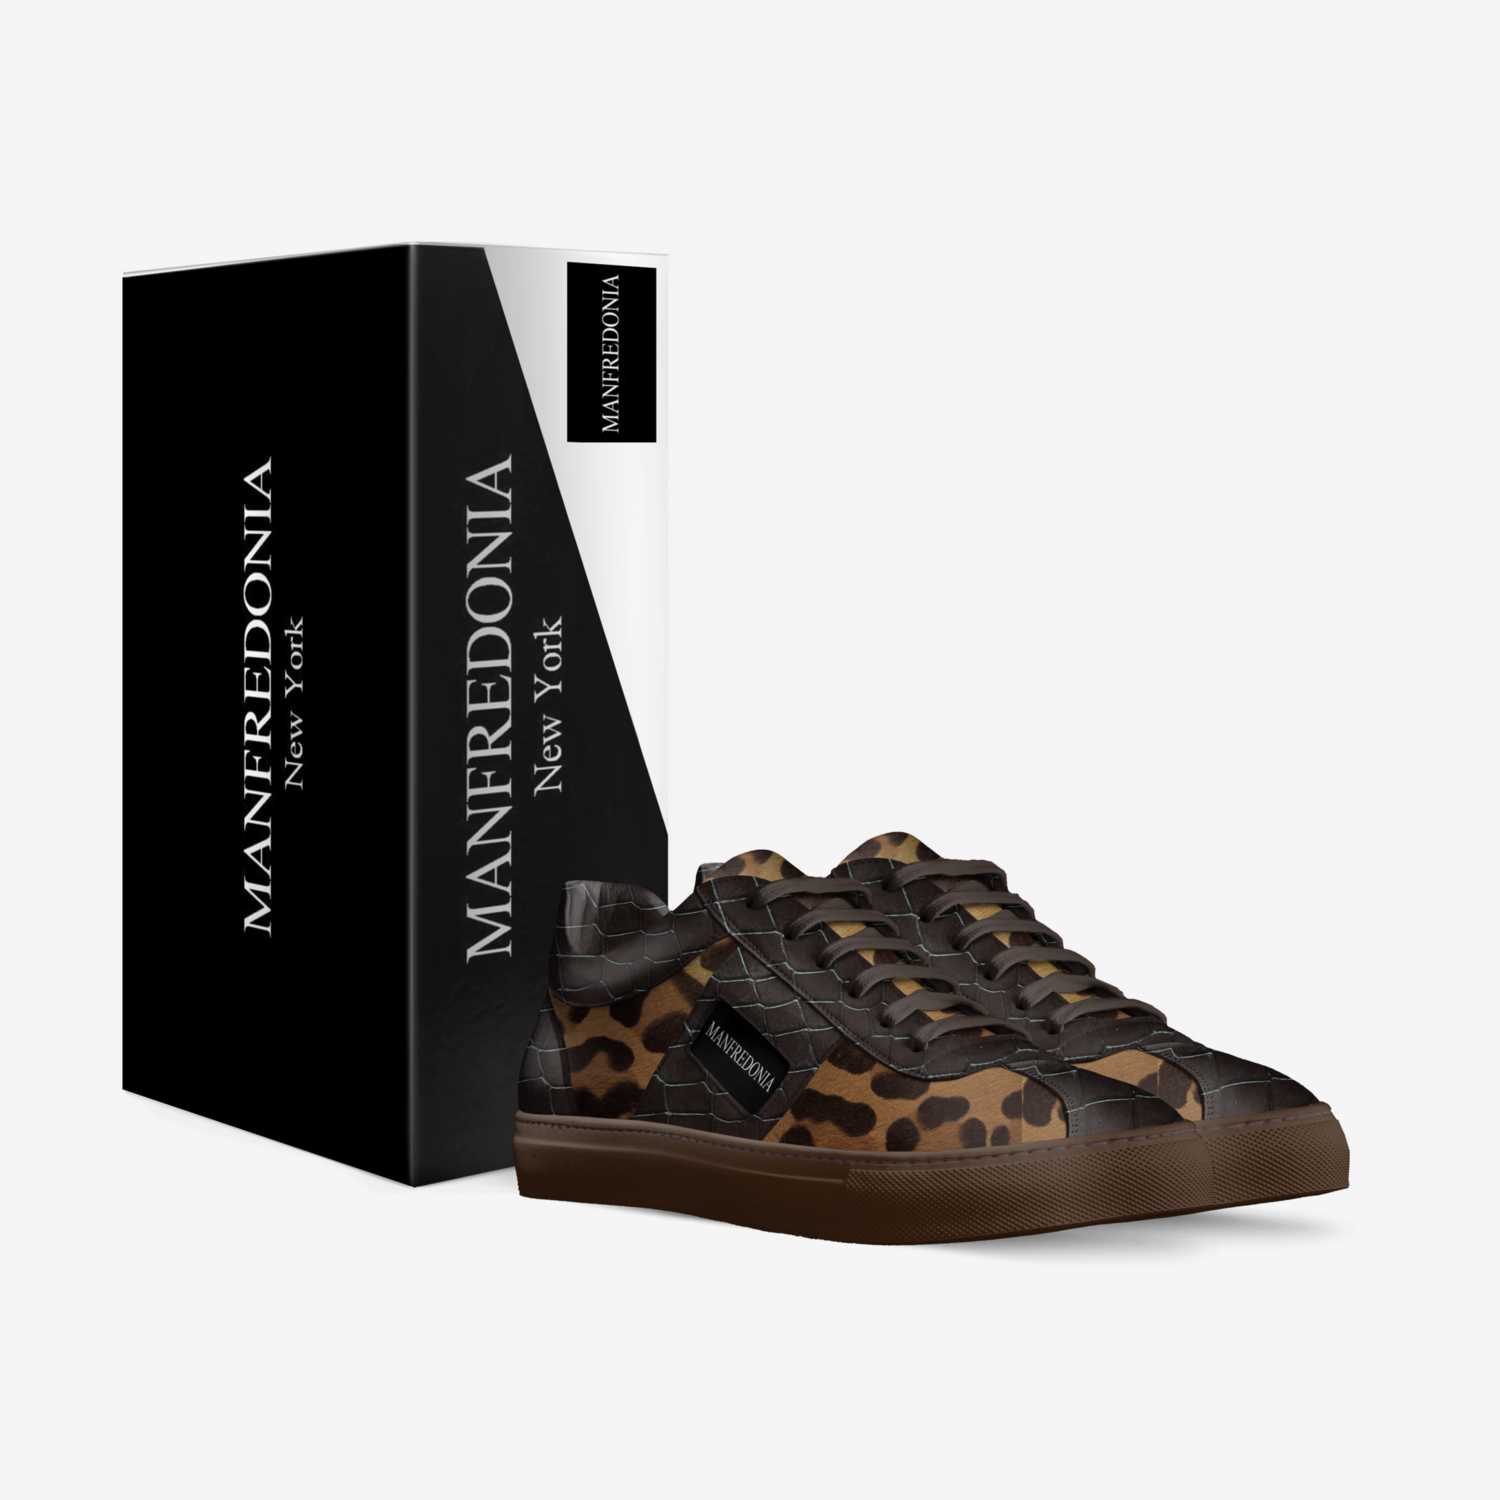 MANFREDONIA custom made in Italy shoes by Anthony Manfredonia | Box view